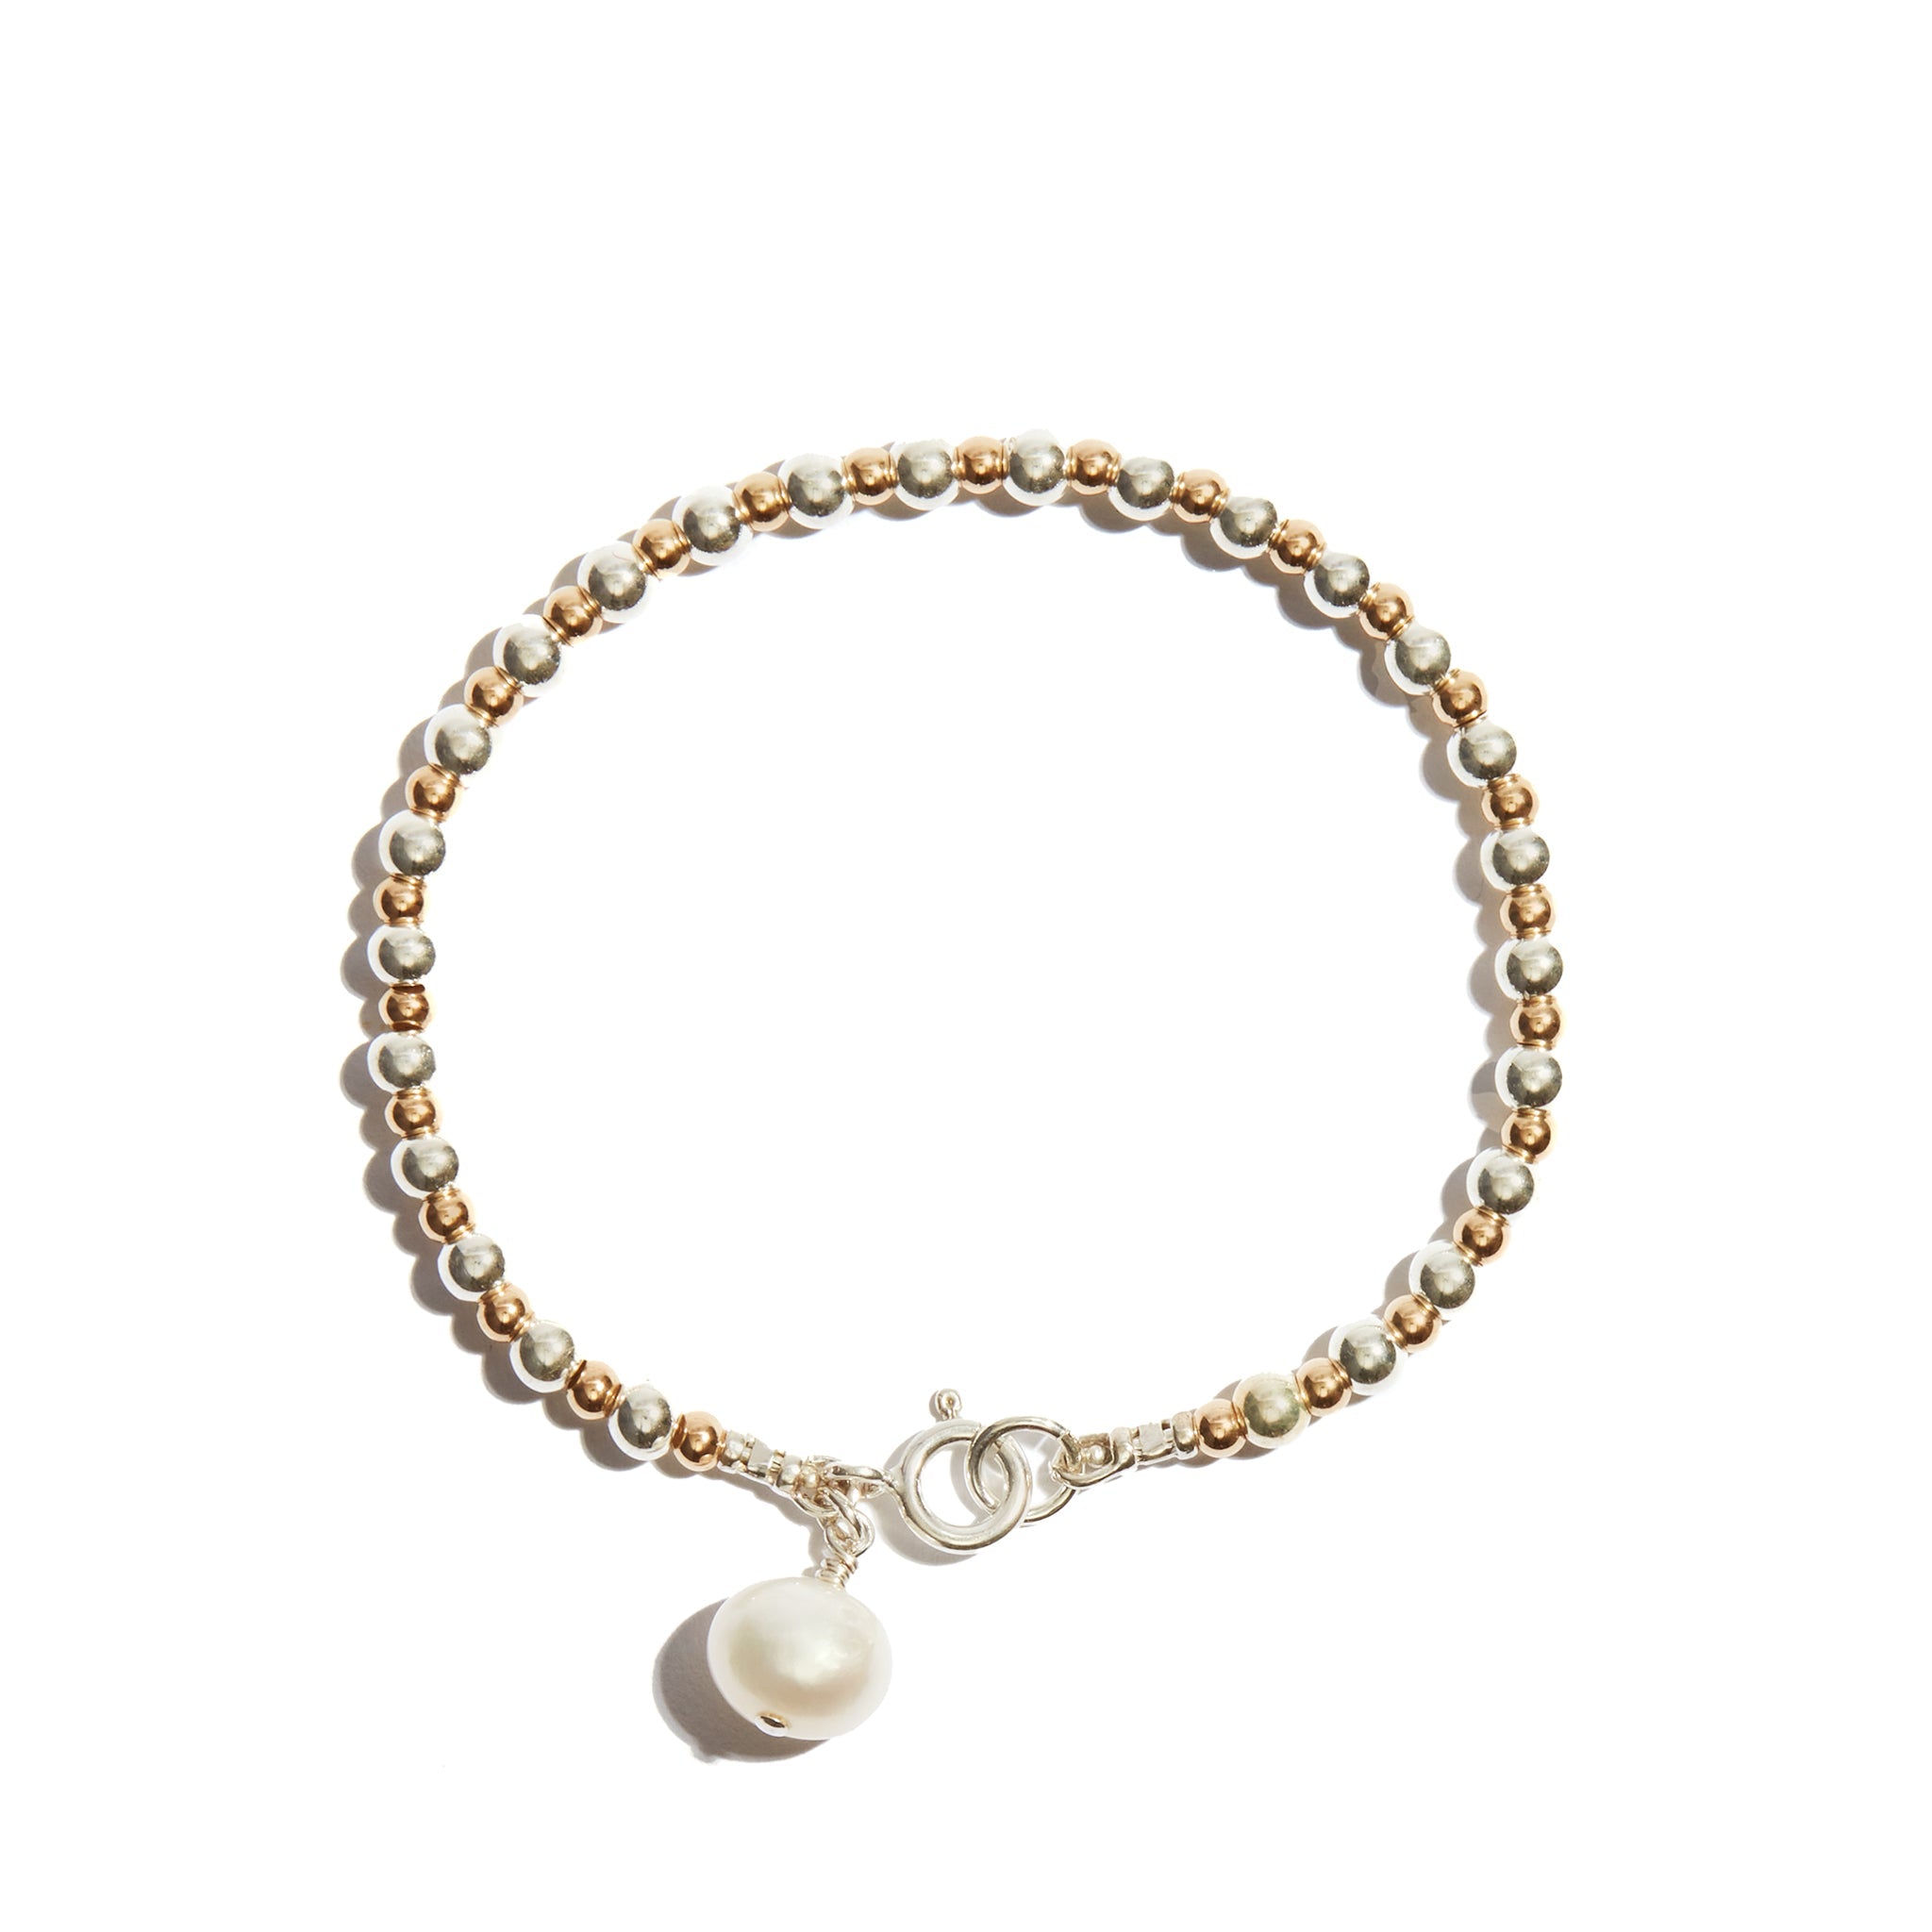 Our Pearl Charm Stacking Bracelet features larger followed by smaller beads consecutively strung, and a single pearl charm at the clasp to add just a little extra bit of elegance.